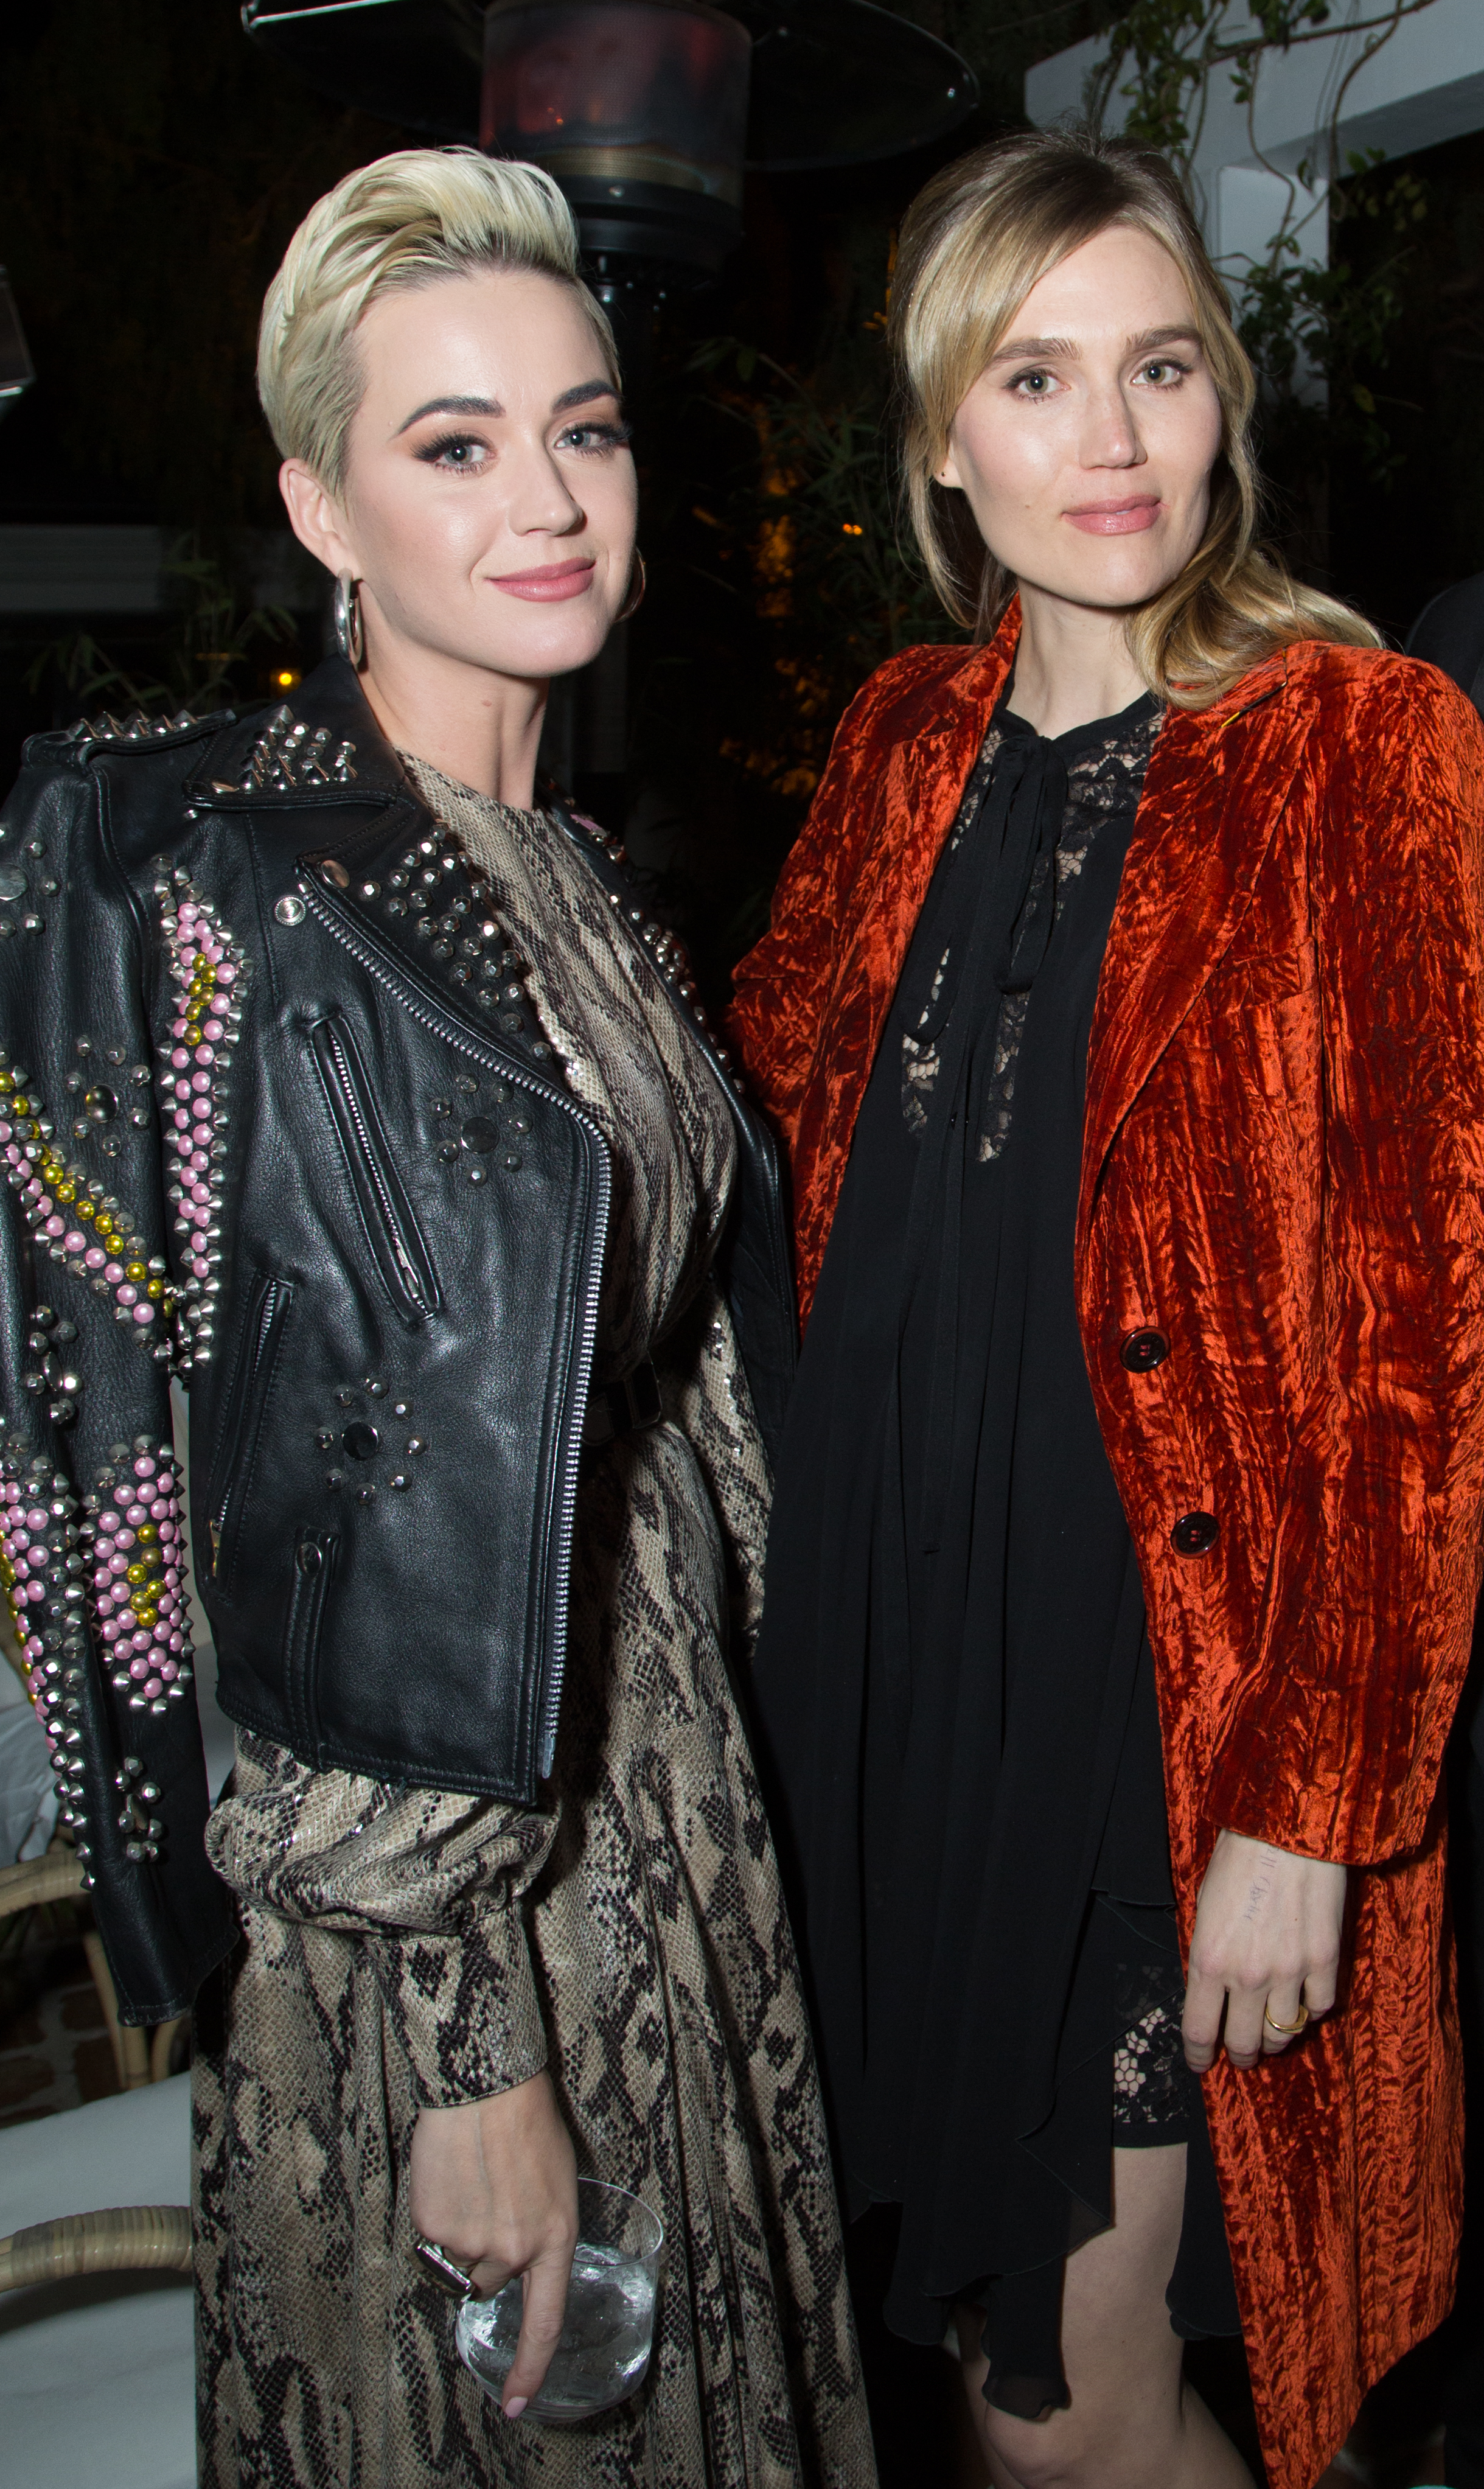 Katy Perry and friend attend the CAA Pre-Oscar Party on Friday, February 22, 2019 in at the San Vicente Bungalows in West Hollywood, California. (Photo: Benjamin Shmikler/ABImages)